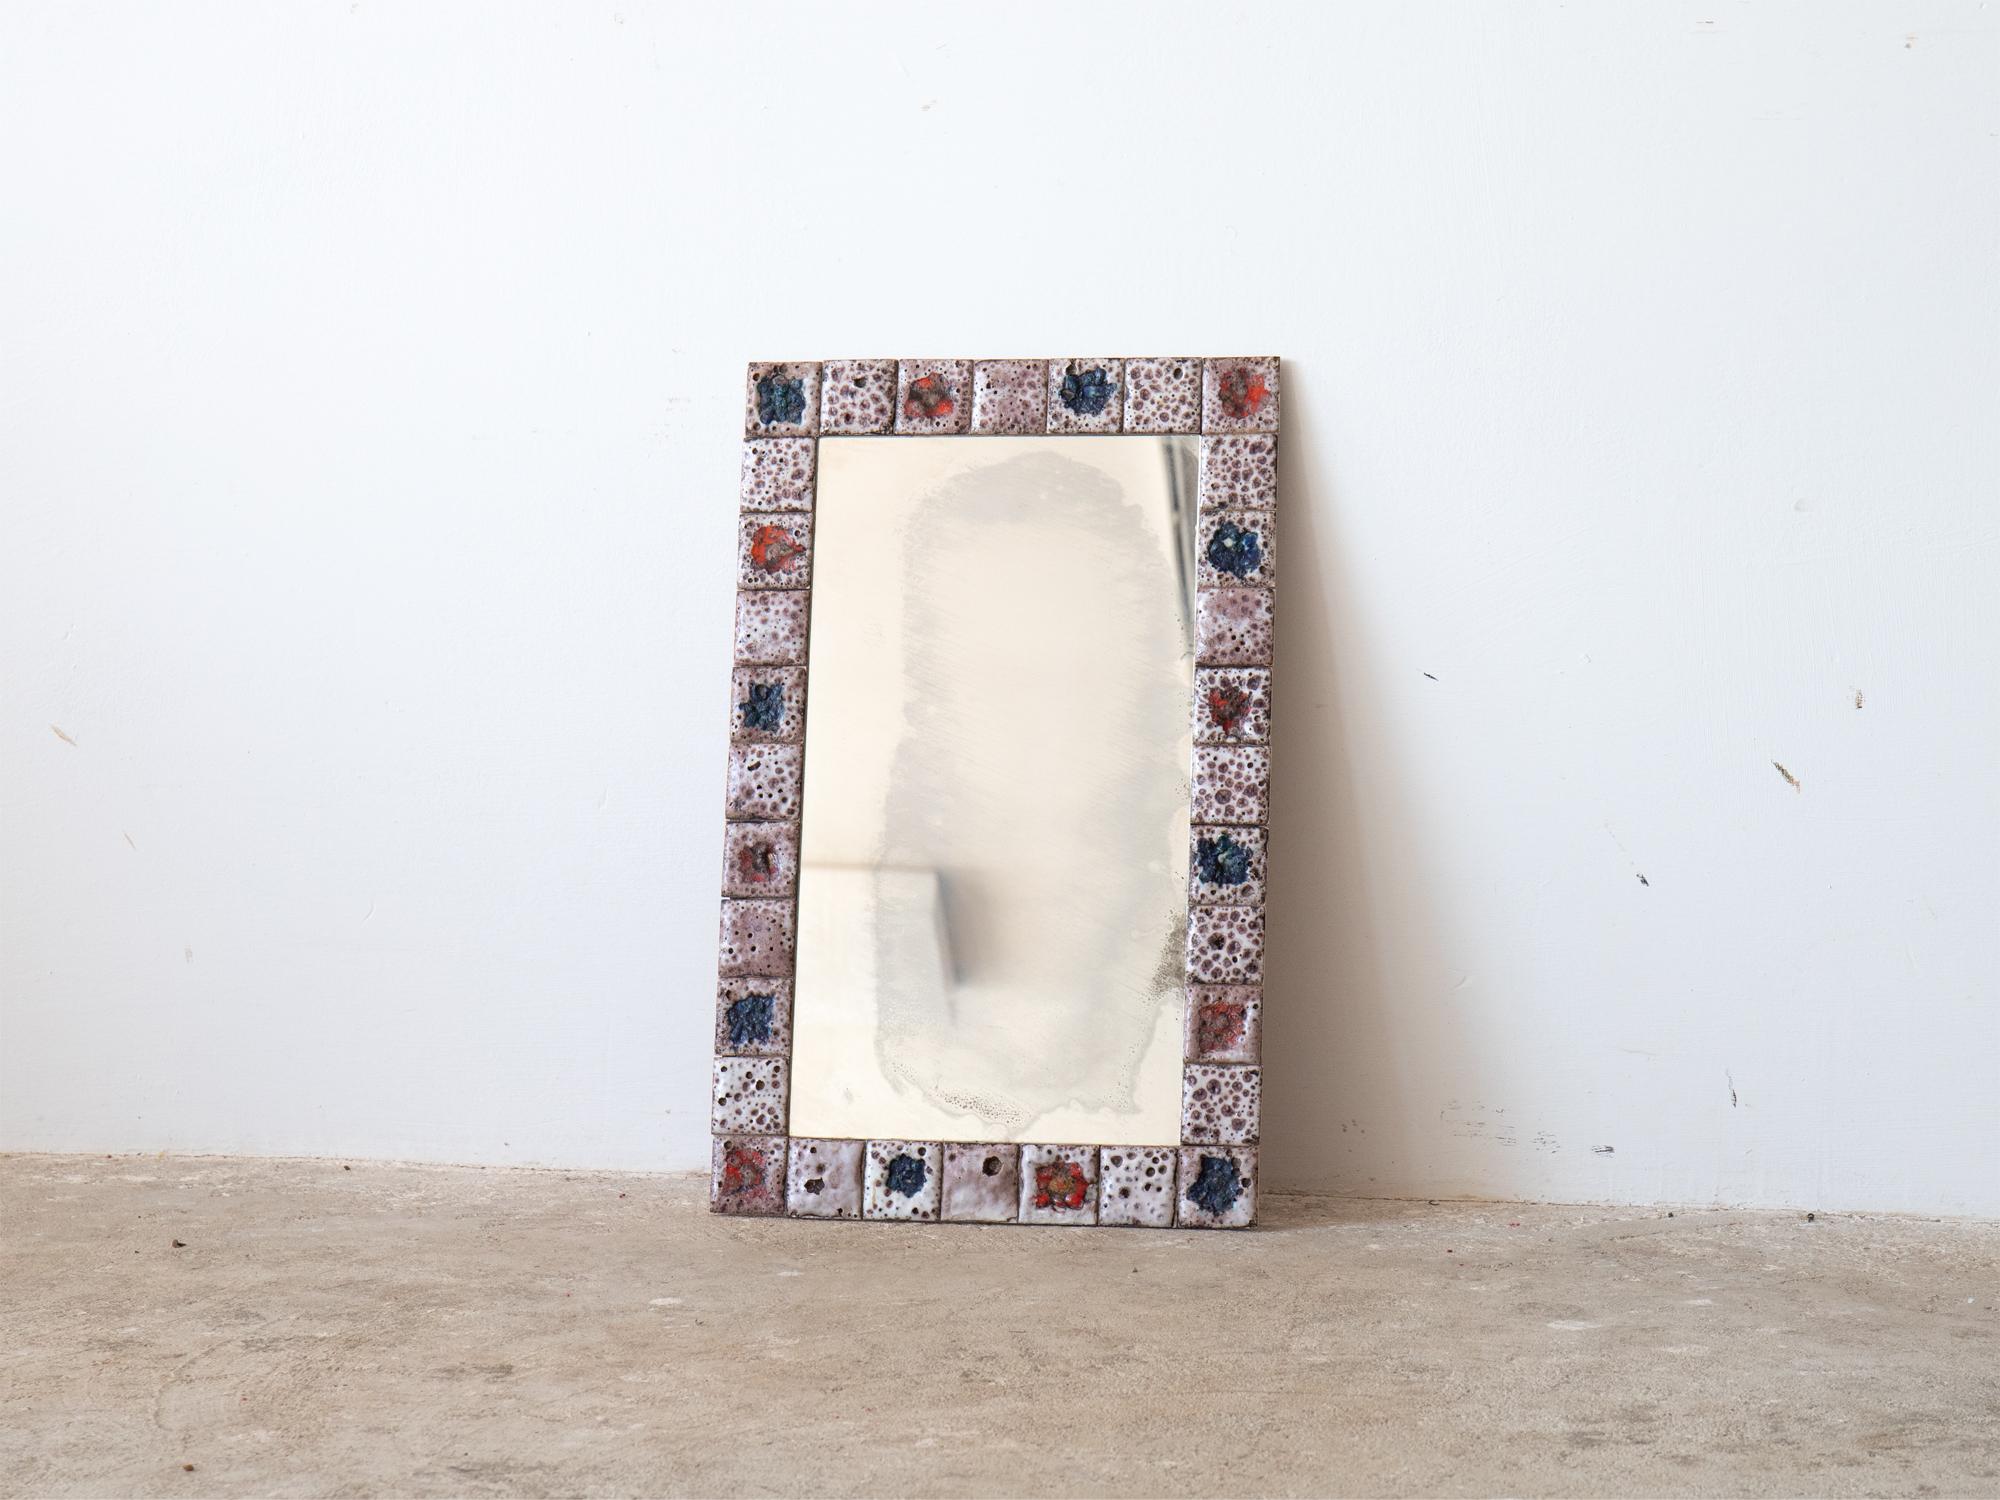 A mid century wall mirror with Vallauris ceramic tile frame. Southern France, c. 1970.

In very good order with no damage to the tiles. Original distressed plate.

55 x 35 cm

21.7 x 13.8 “